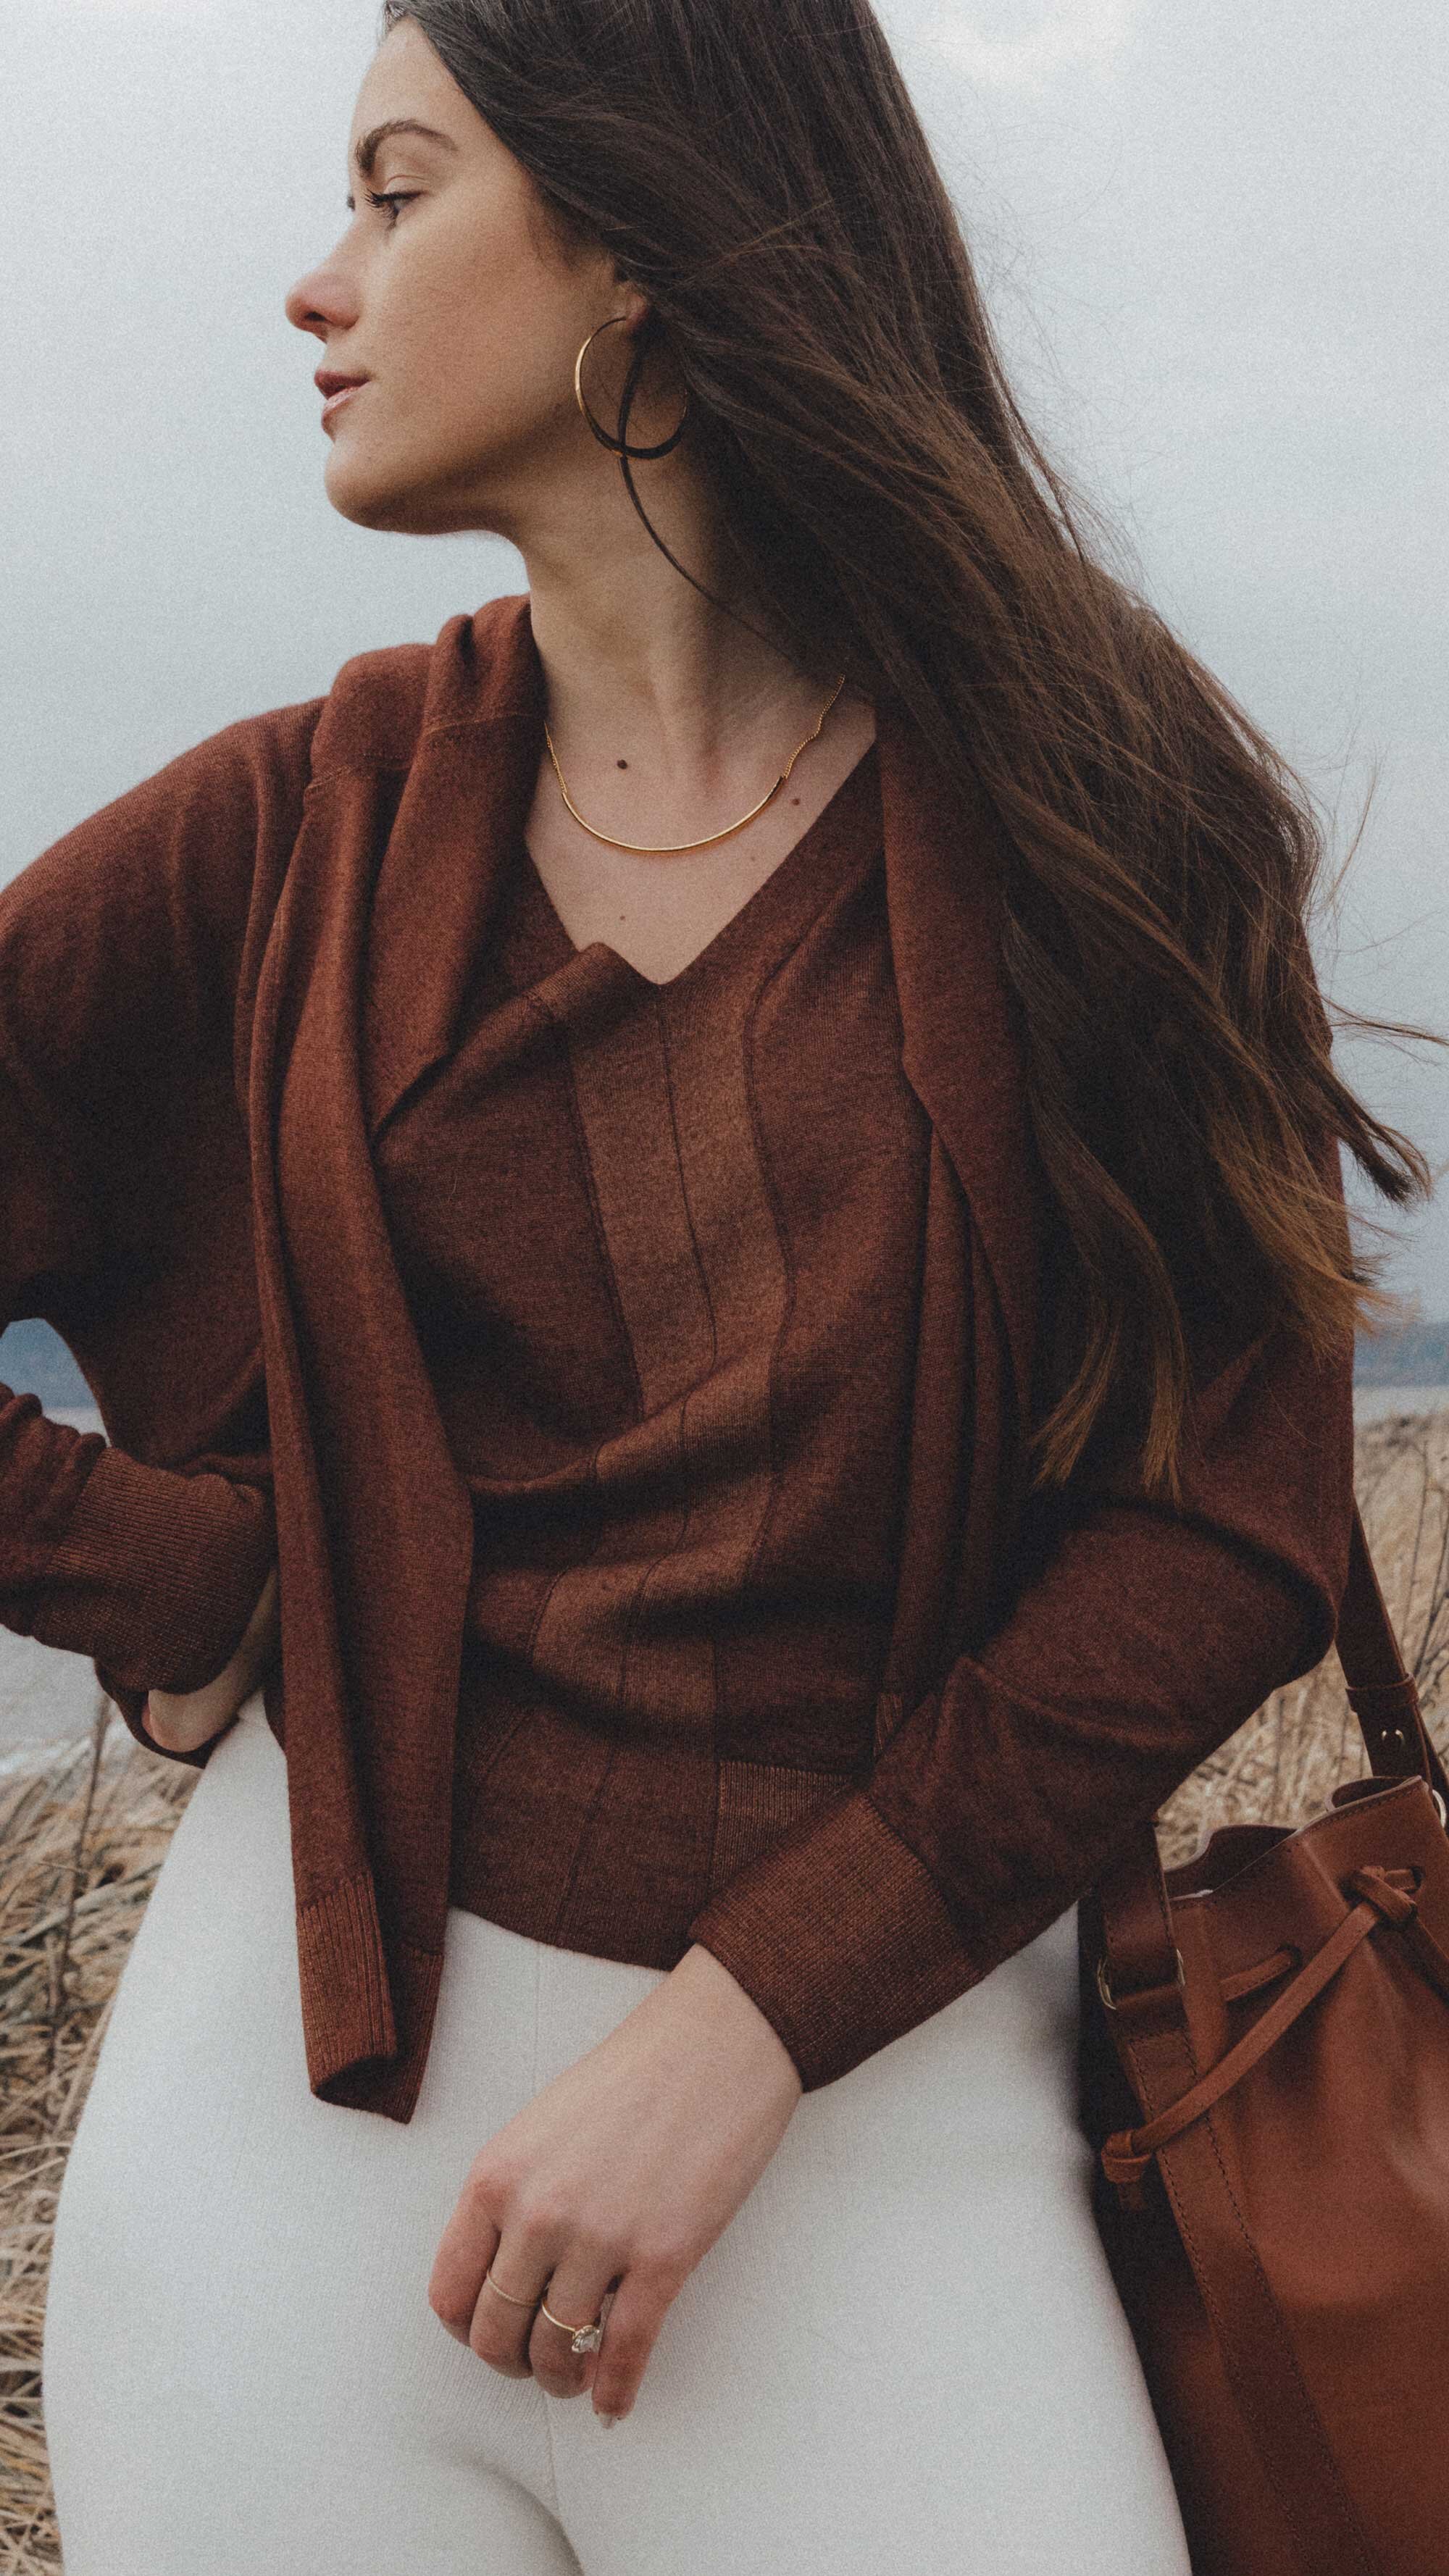 Easy winter outfit. Sarah Butler of @sarahchristine wearing Falconeri Ultralight Cashmere Oversized V-neck Sweater and Sezane Farrow Handcrafted leather bucket bag - 2.jpg